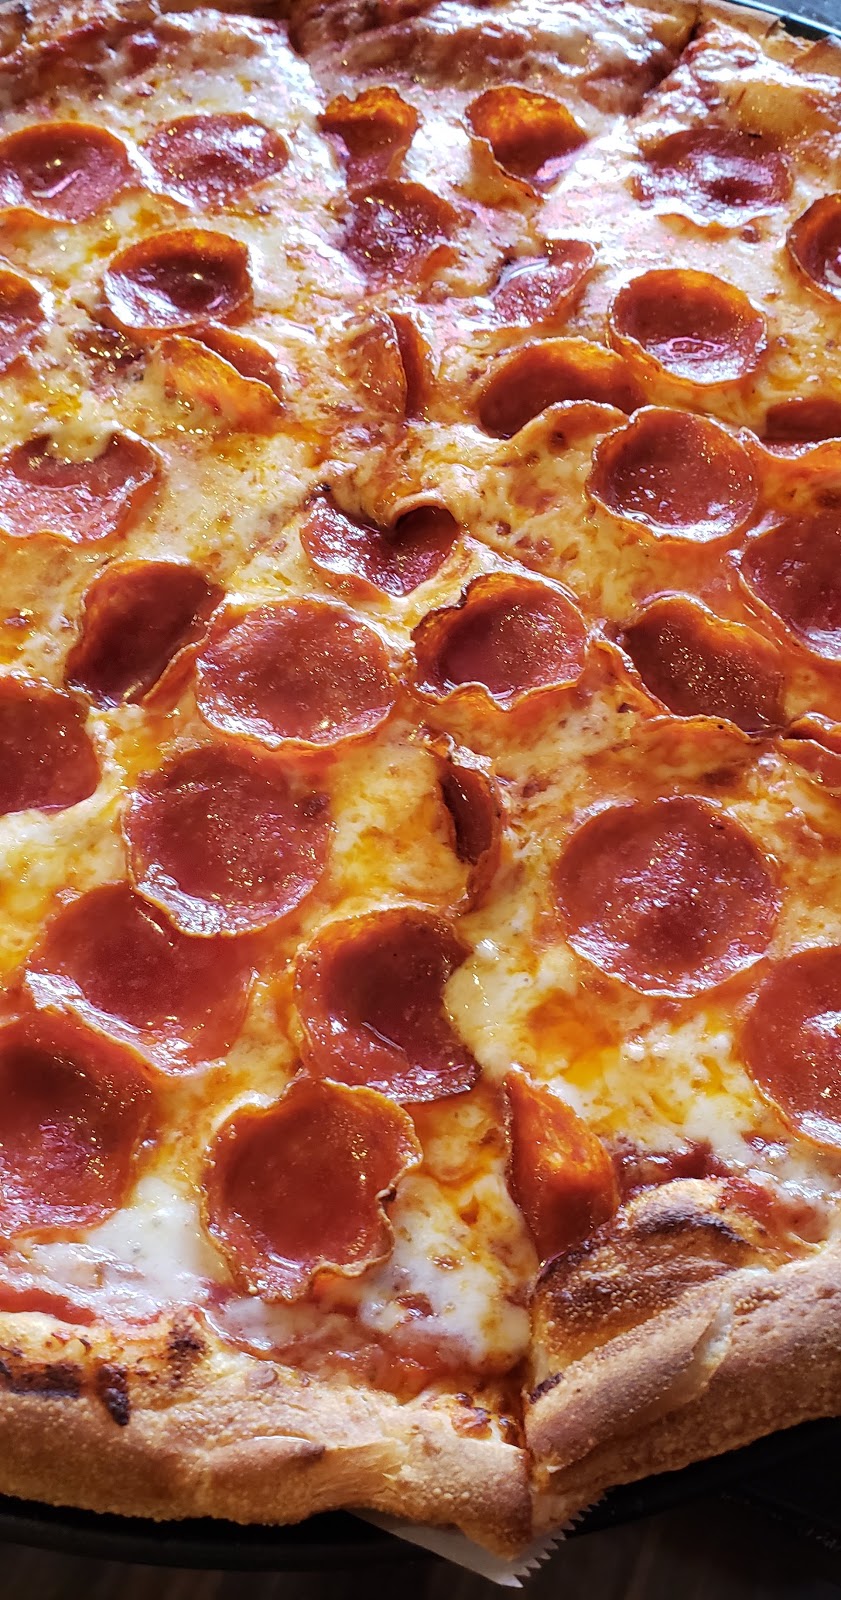 Pats Pizza and Bistro | 3601 Chichester Ave, Boothwyn, PA 19061 | Phone: (610) 497-5544